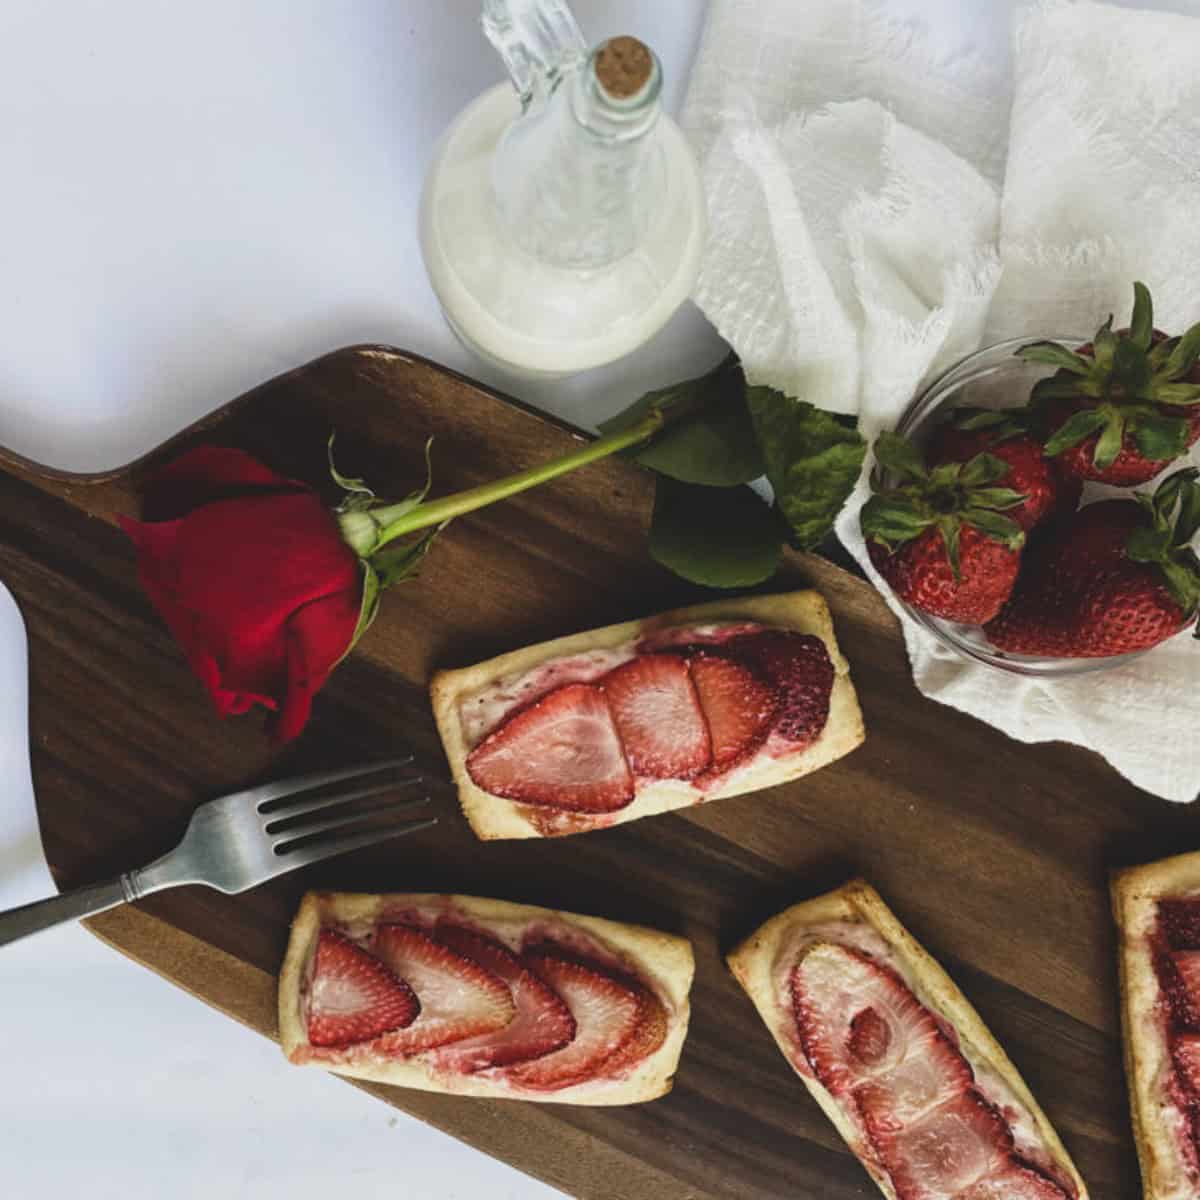 A close-up of a rectangular puff pastry turnover filled with cream cheese and sliced strawberries. The pastry is golden brown and flaky, with a dusting of powdered sugar on top. The strawberries are bright red and juicy.